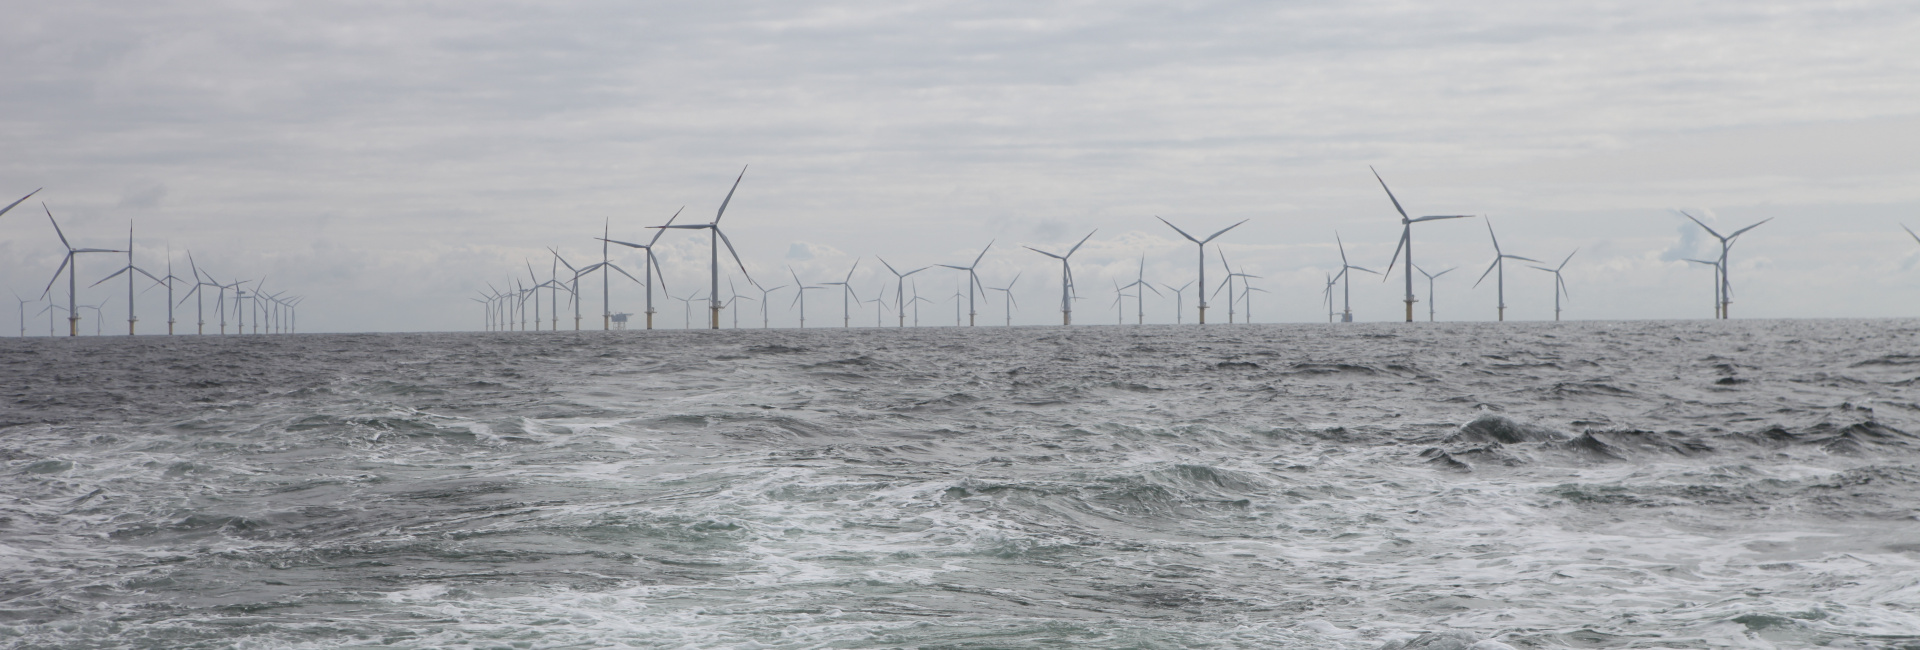 View across the North Sea to an offshore wind farm on the horizon. Photo: Hereon/ Anna Ebeling